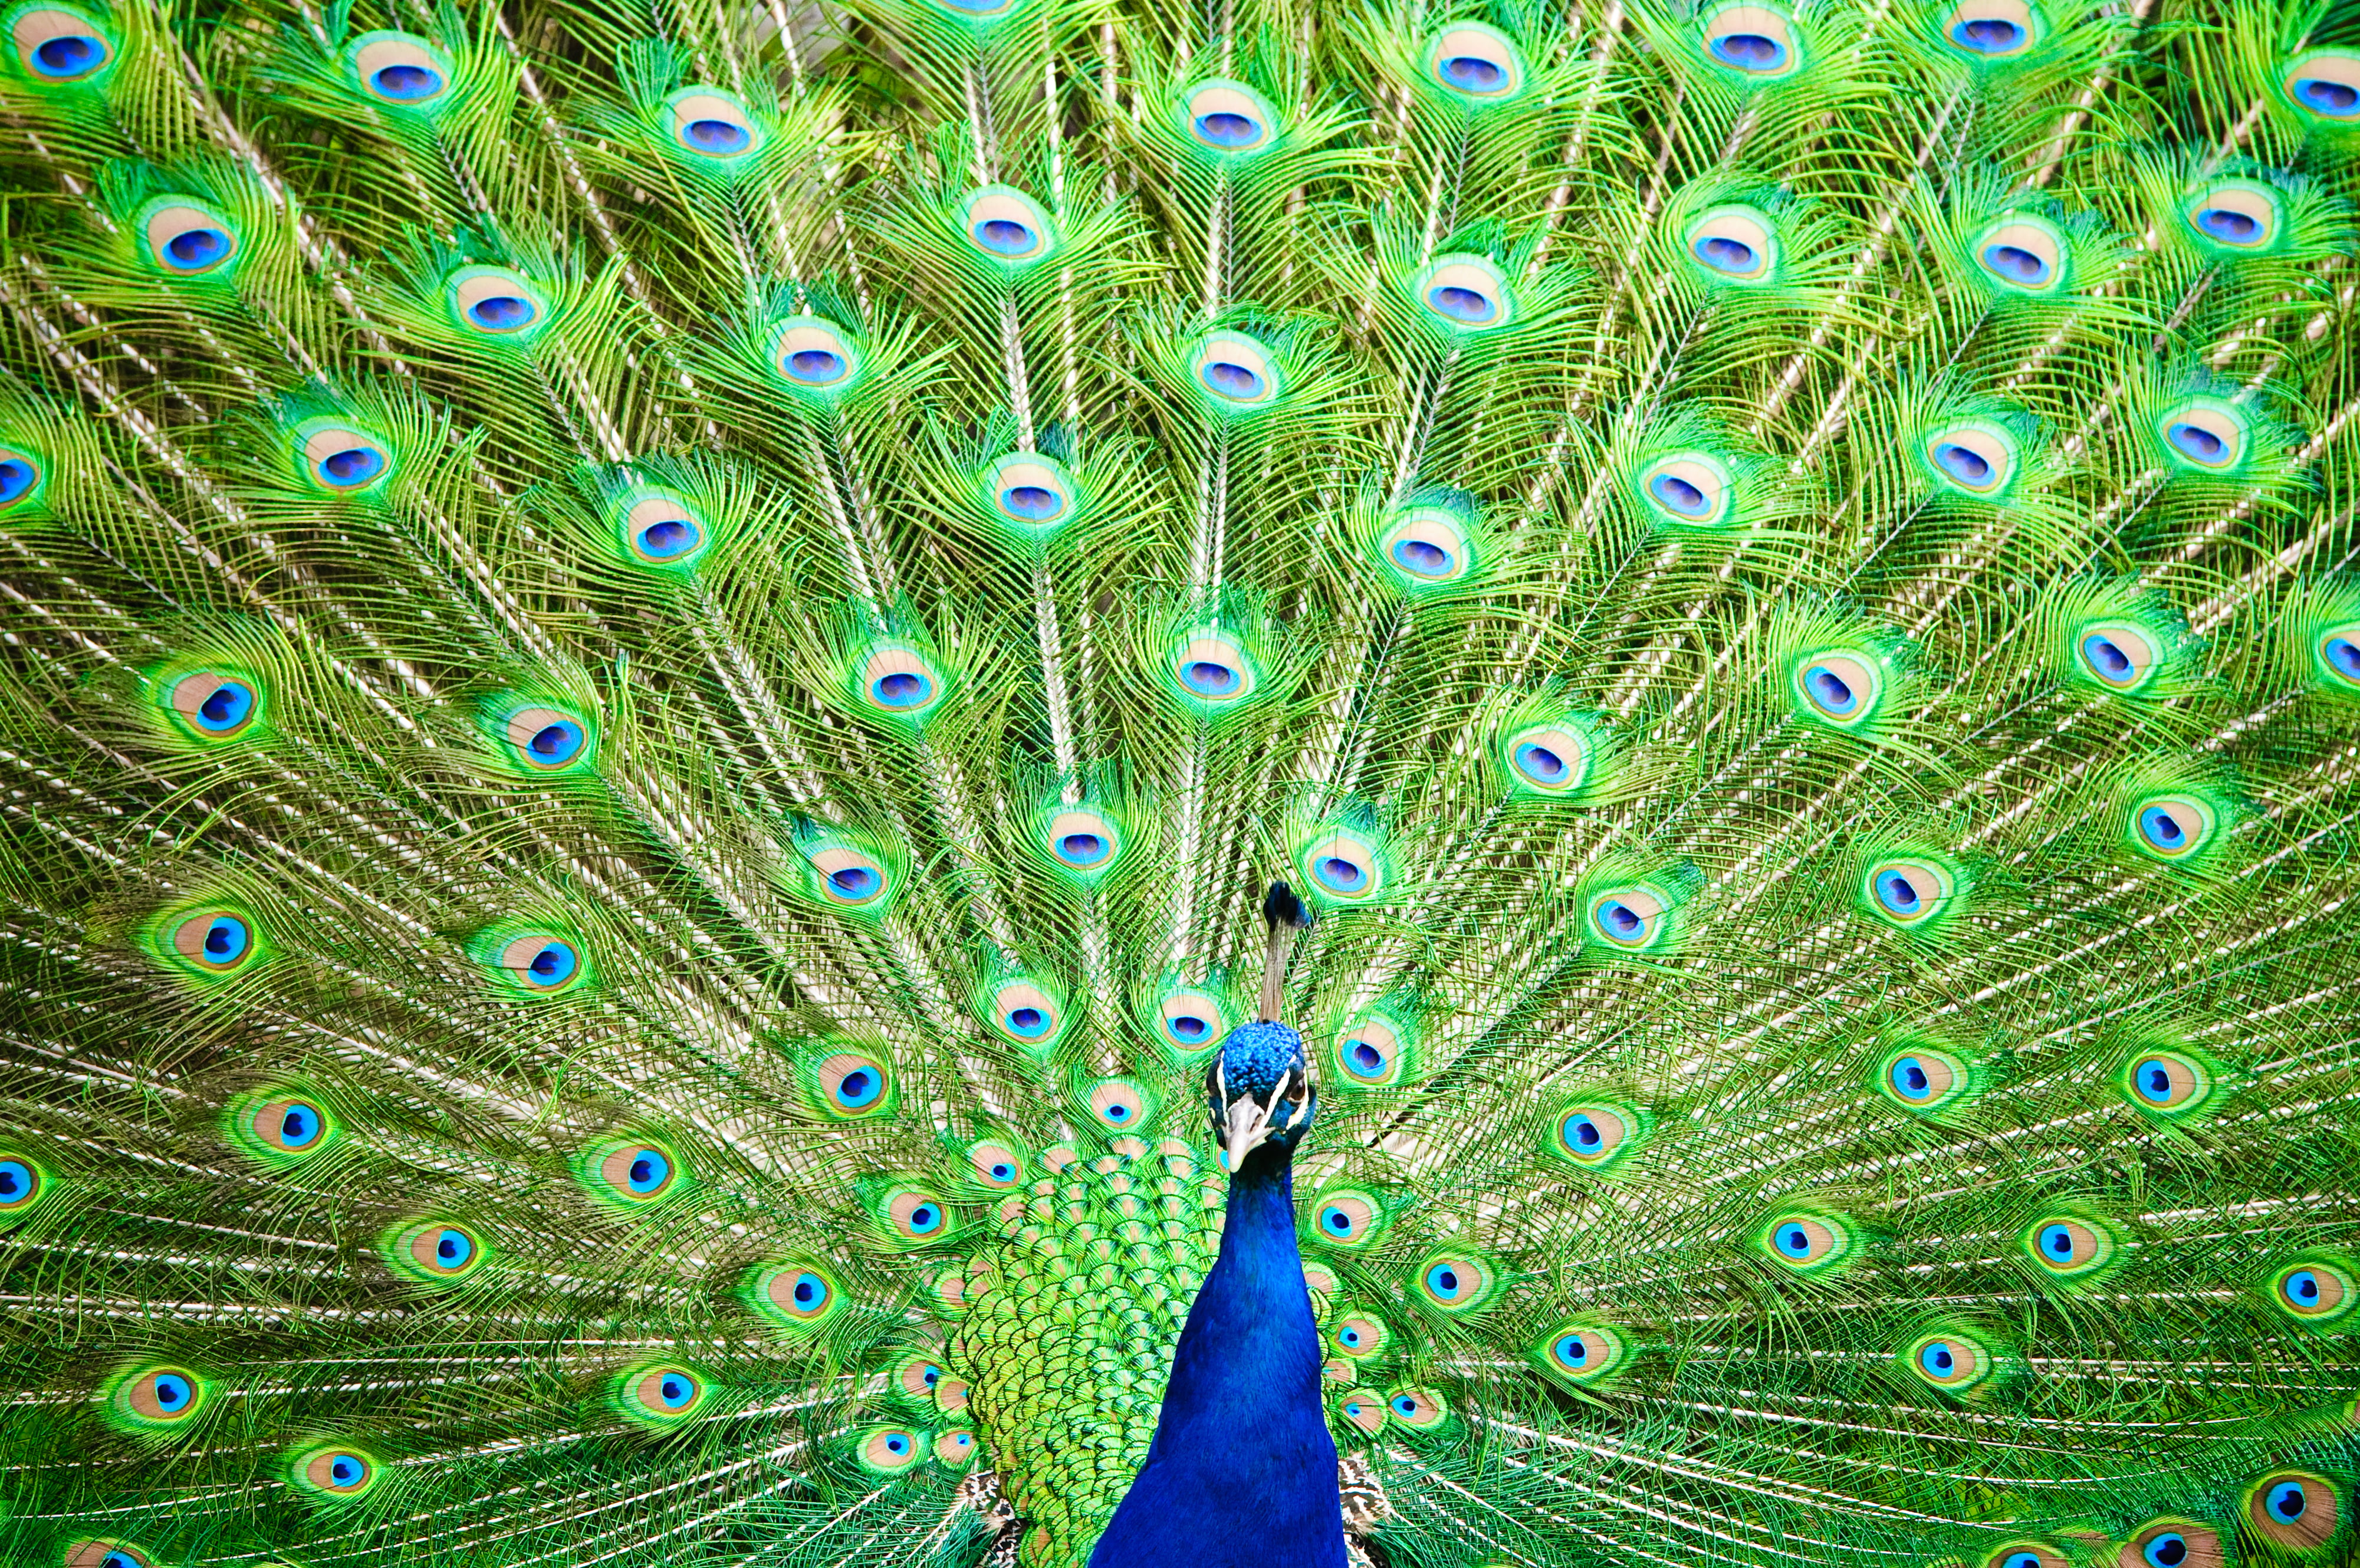 Open Feathered Green And Blue Peacock, Peafowl Hd Wallpaper , HD Wallpaper & Backgrounds